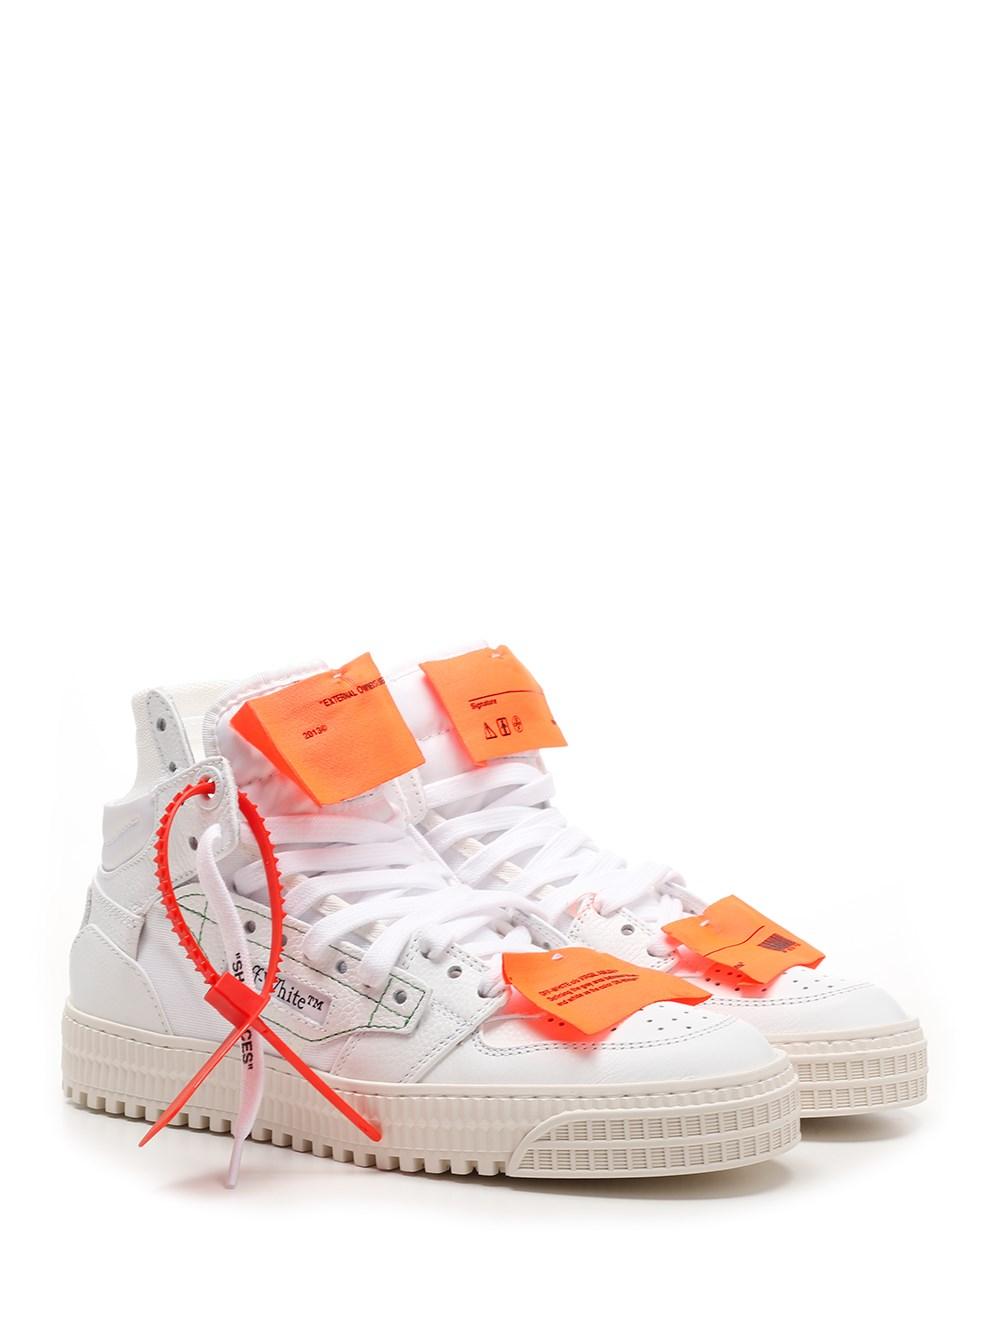 Off-White c/o Virgil Abloh Sneakers Alte 